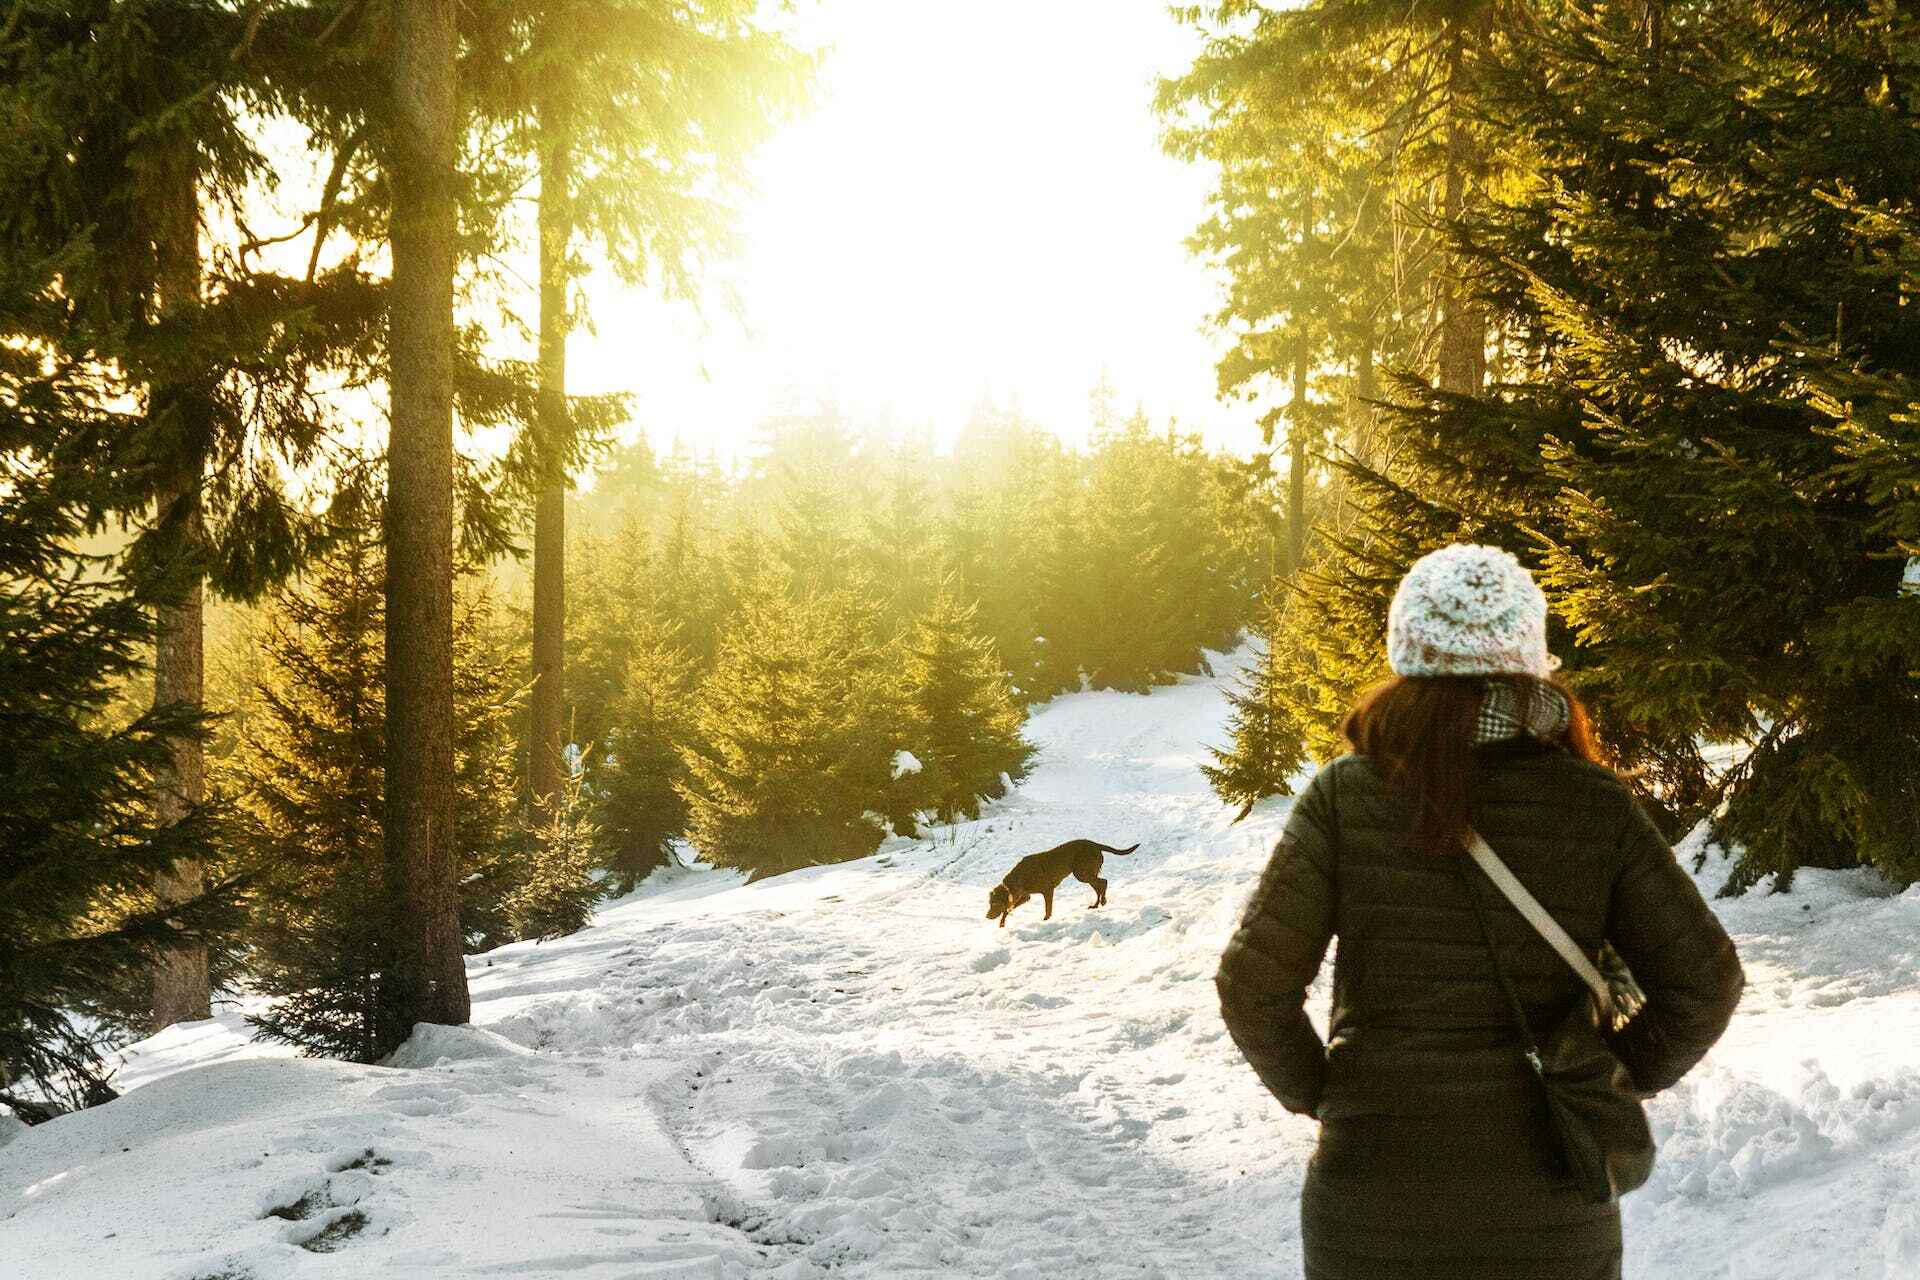 A woman and dog exploring a snowy forest